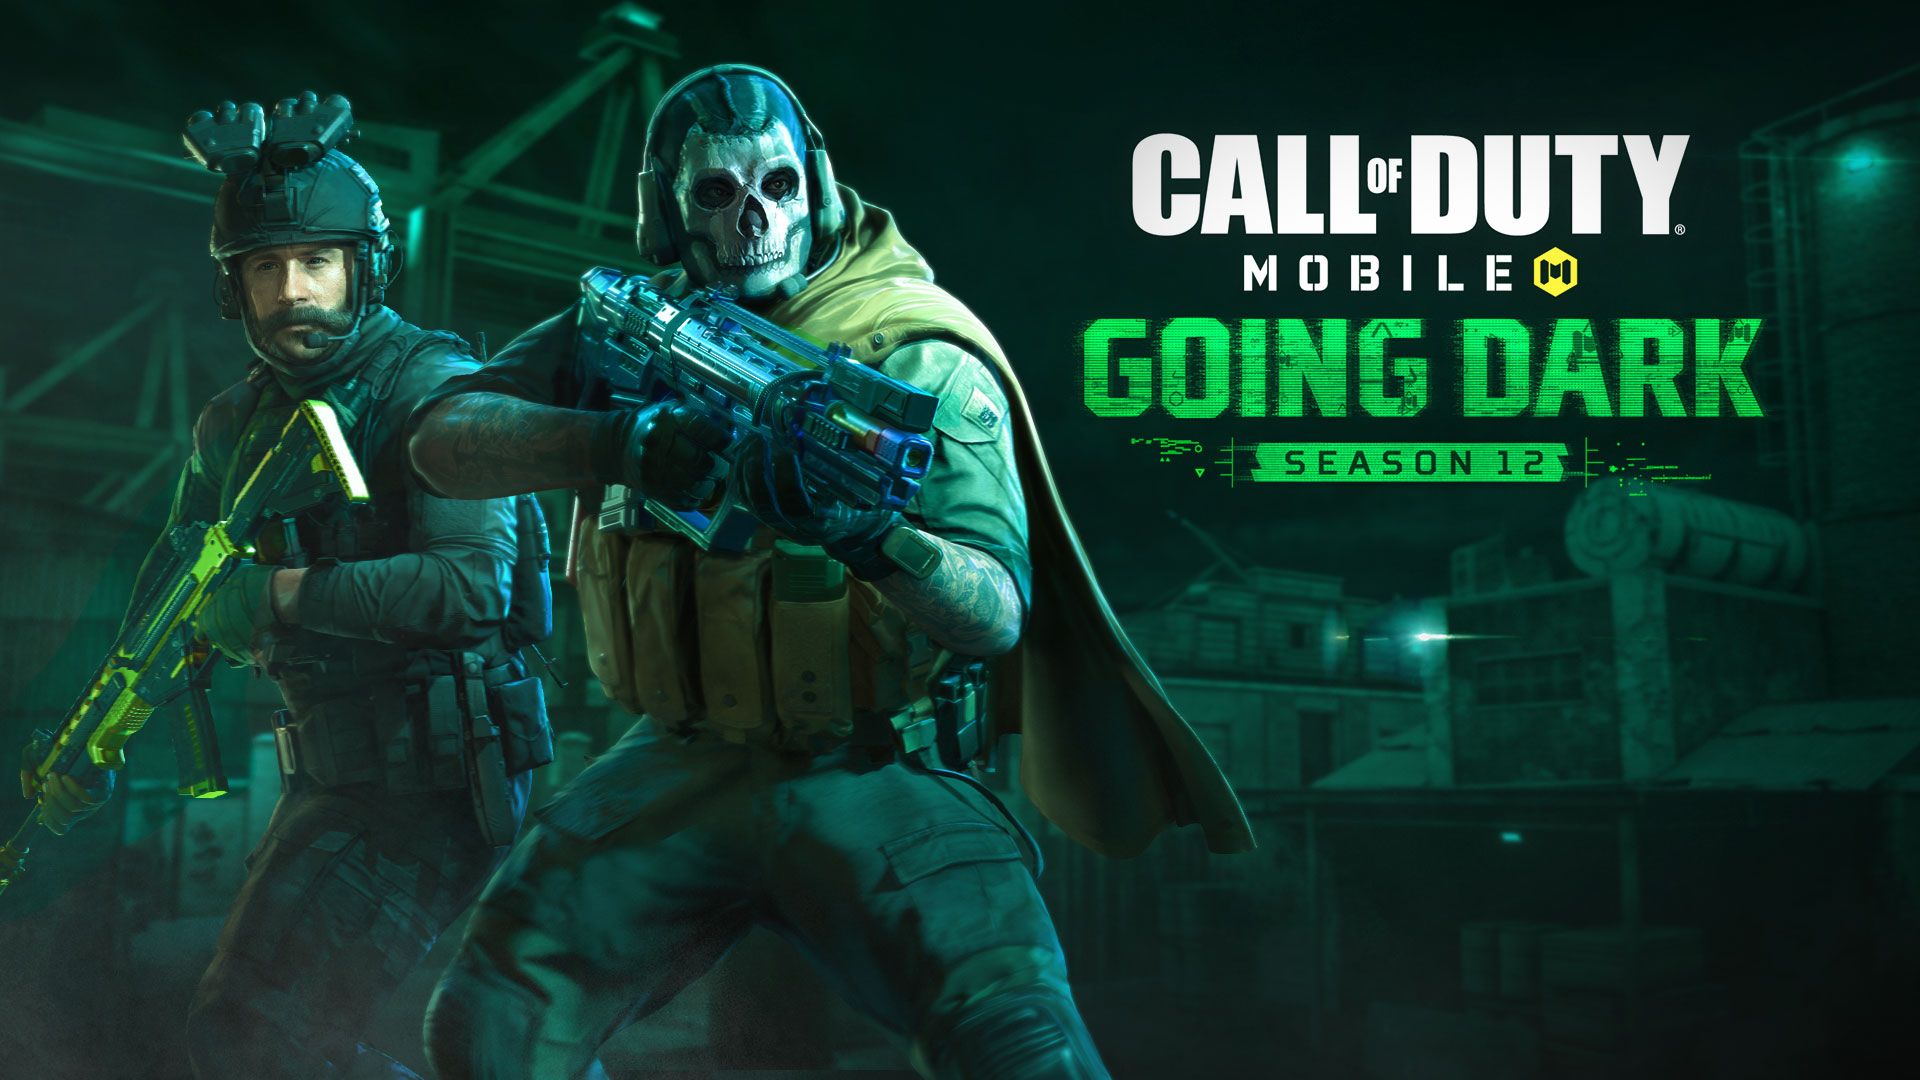 Night Descends on Call of Duty®: Mobile in Going Dark, the Latest Season Launching November 11